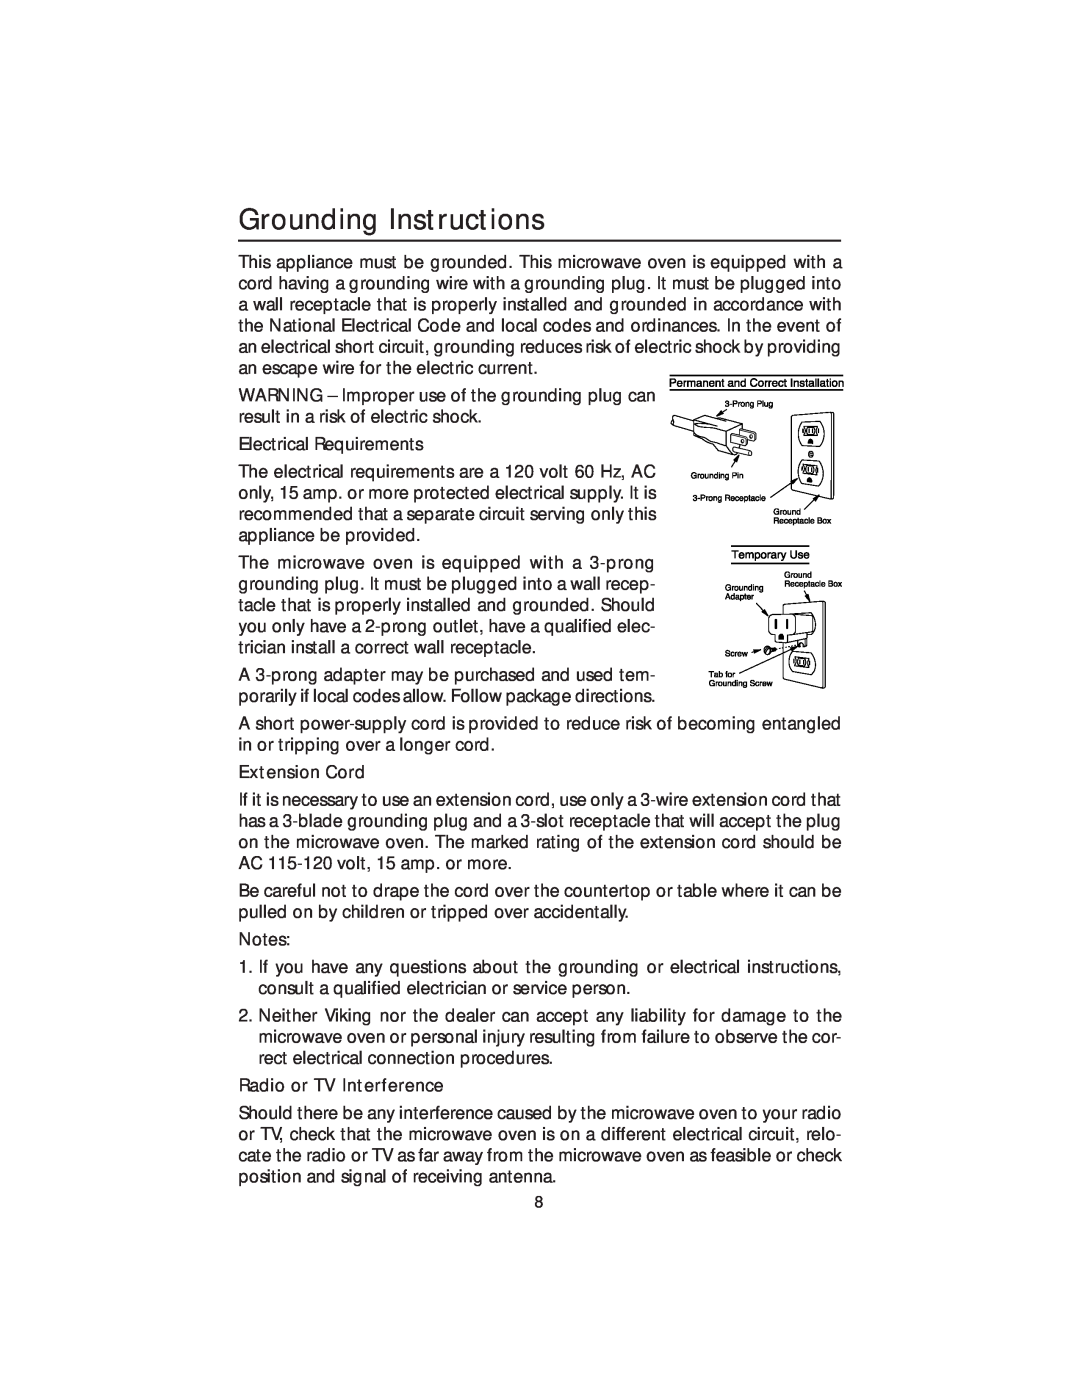 Viking DMOS200SS manual Grounding Instructions, Extension Cord, Radio or TV Interference 